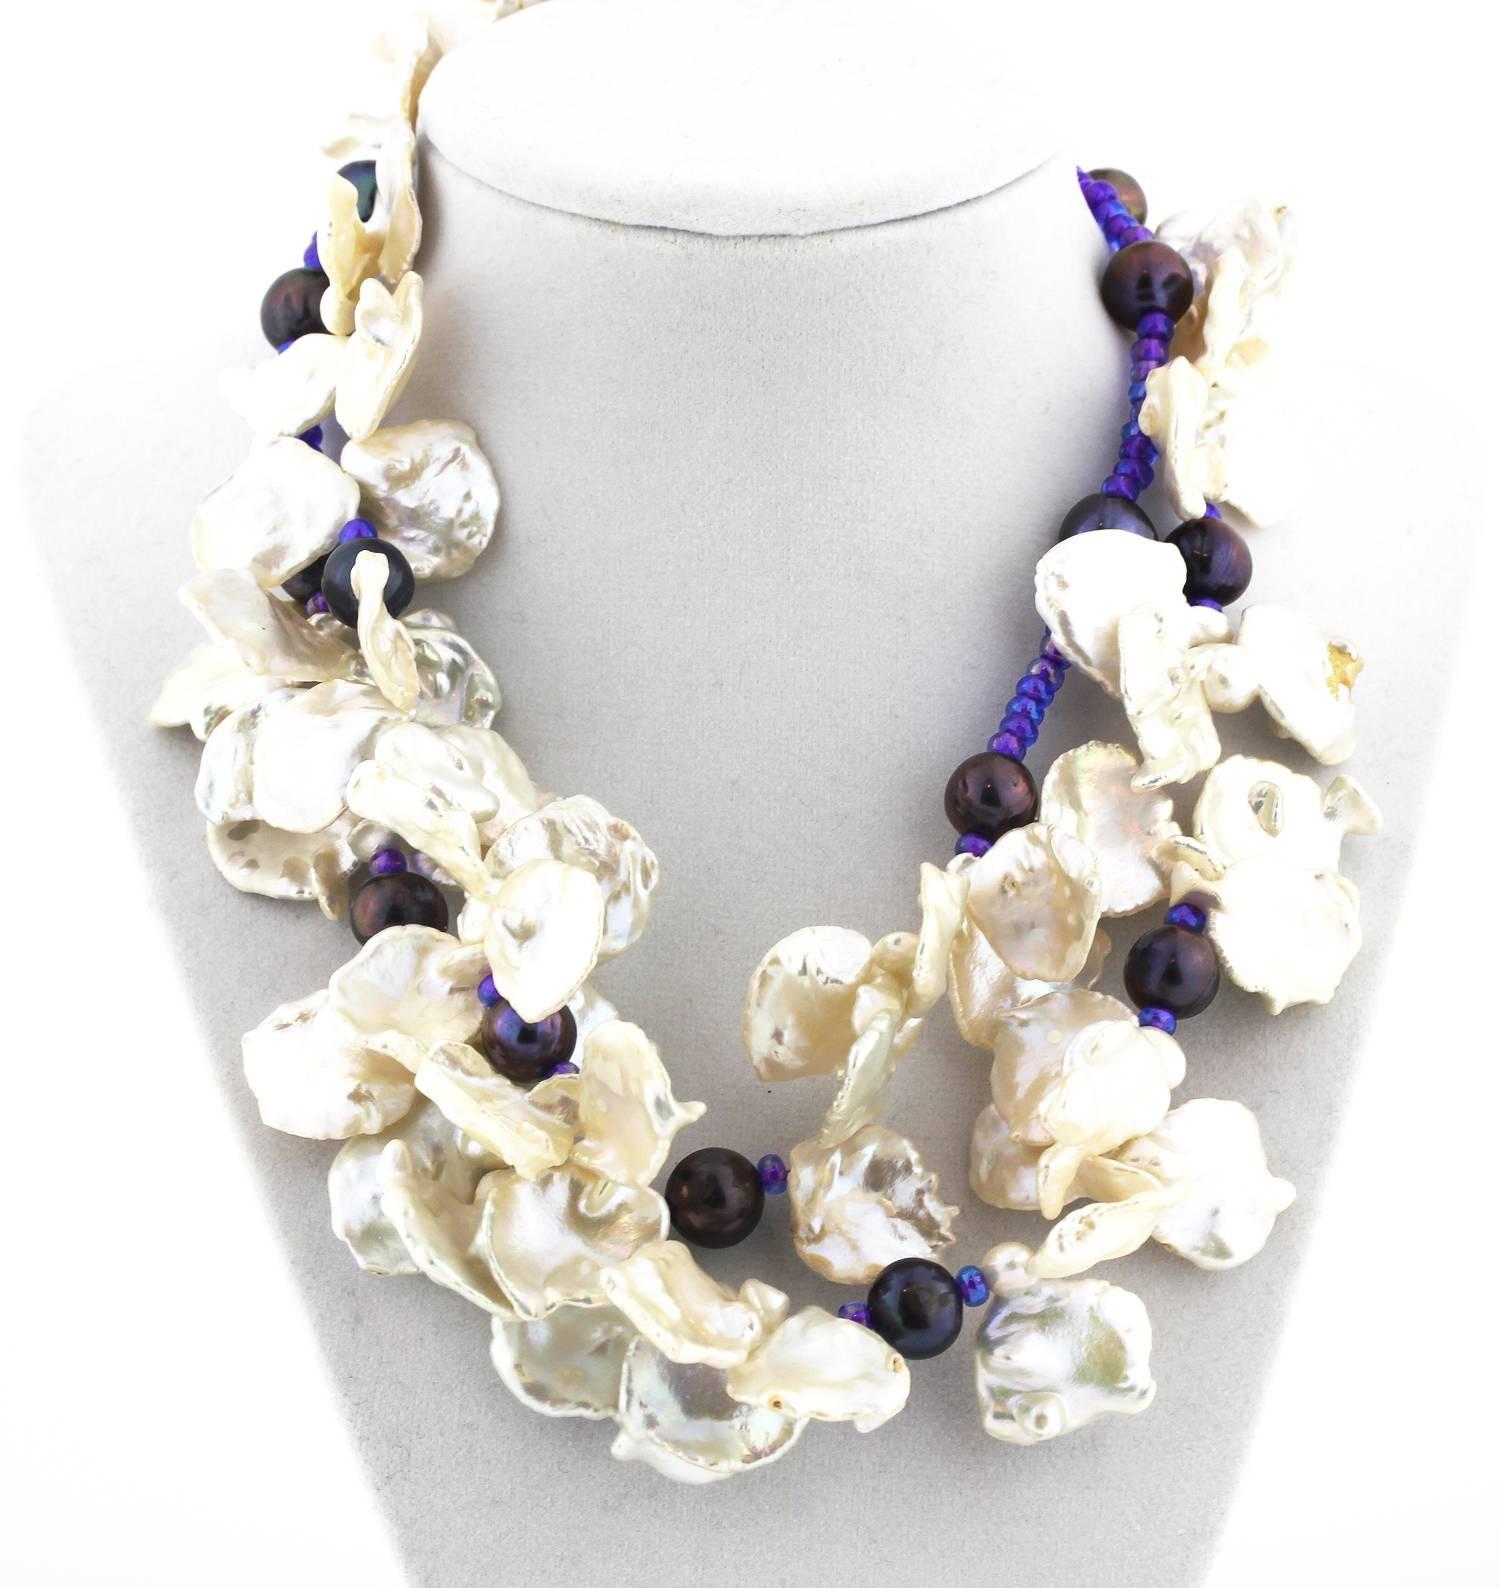 Double strand of Flowery white Keshi  pearls interspersed with purple Fireball pearls and sparkly accents necklace
Size:  white Keshi pearls vary from approximately 1 inch to 1 1/2 inches
Length:  18 inches
Clasp:  silver tone

